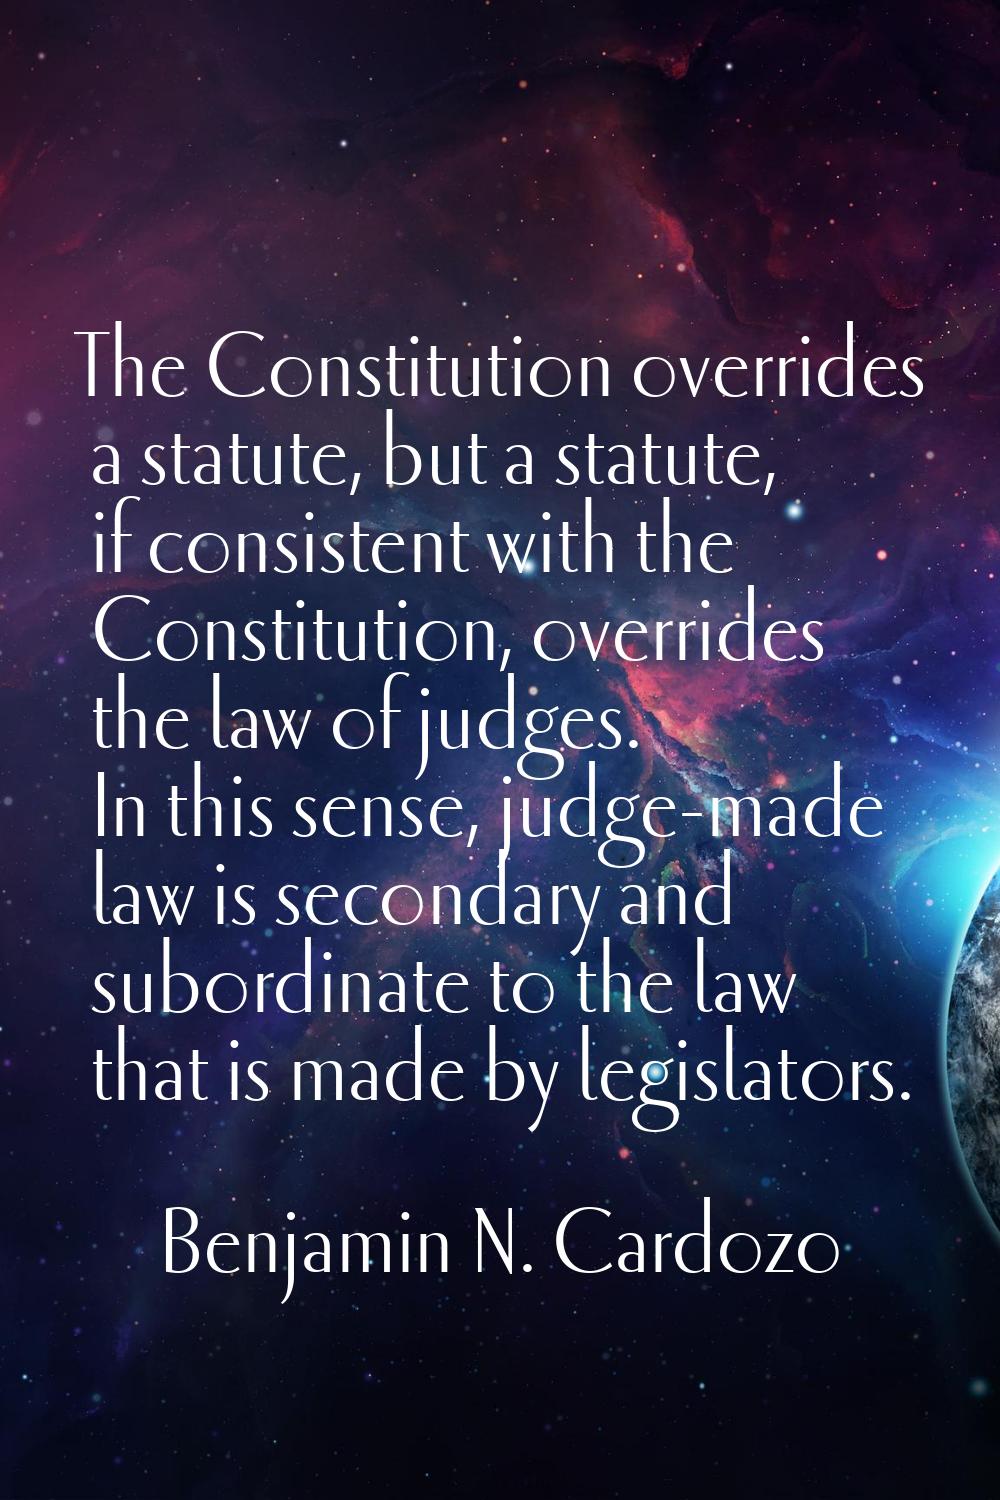 The Constitution overrides a statute, but a statute, if consistent with the Constitution, overrides